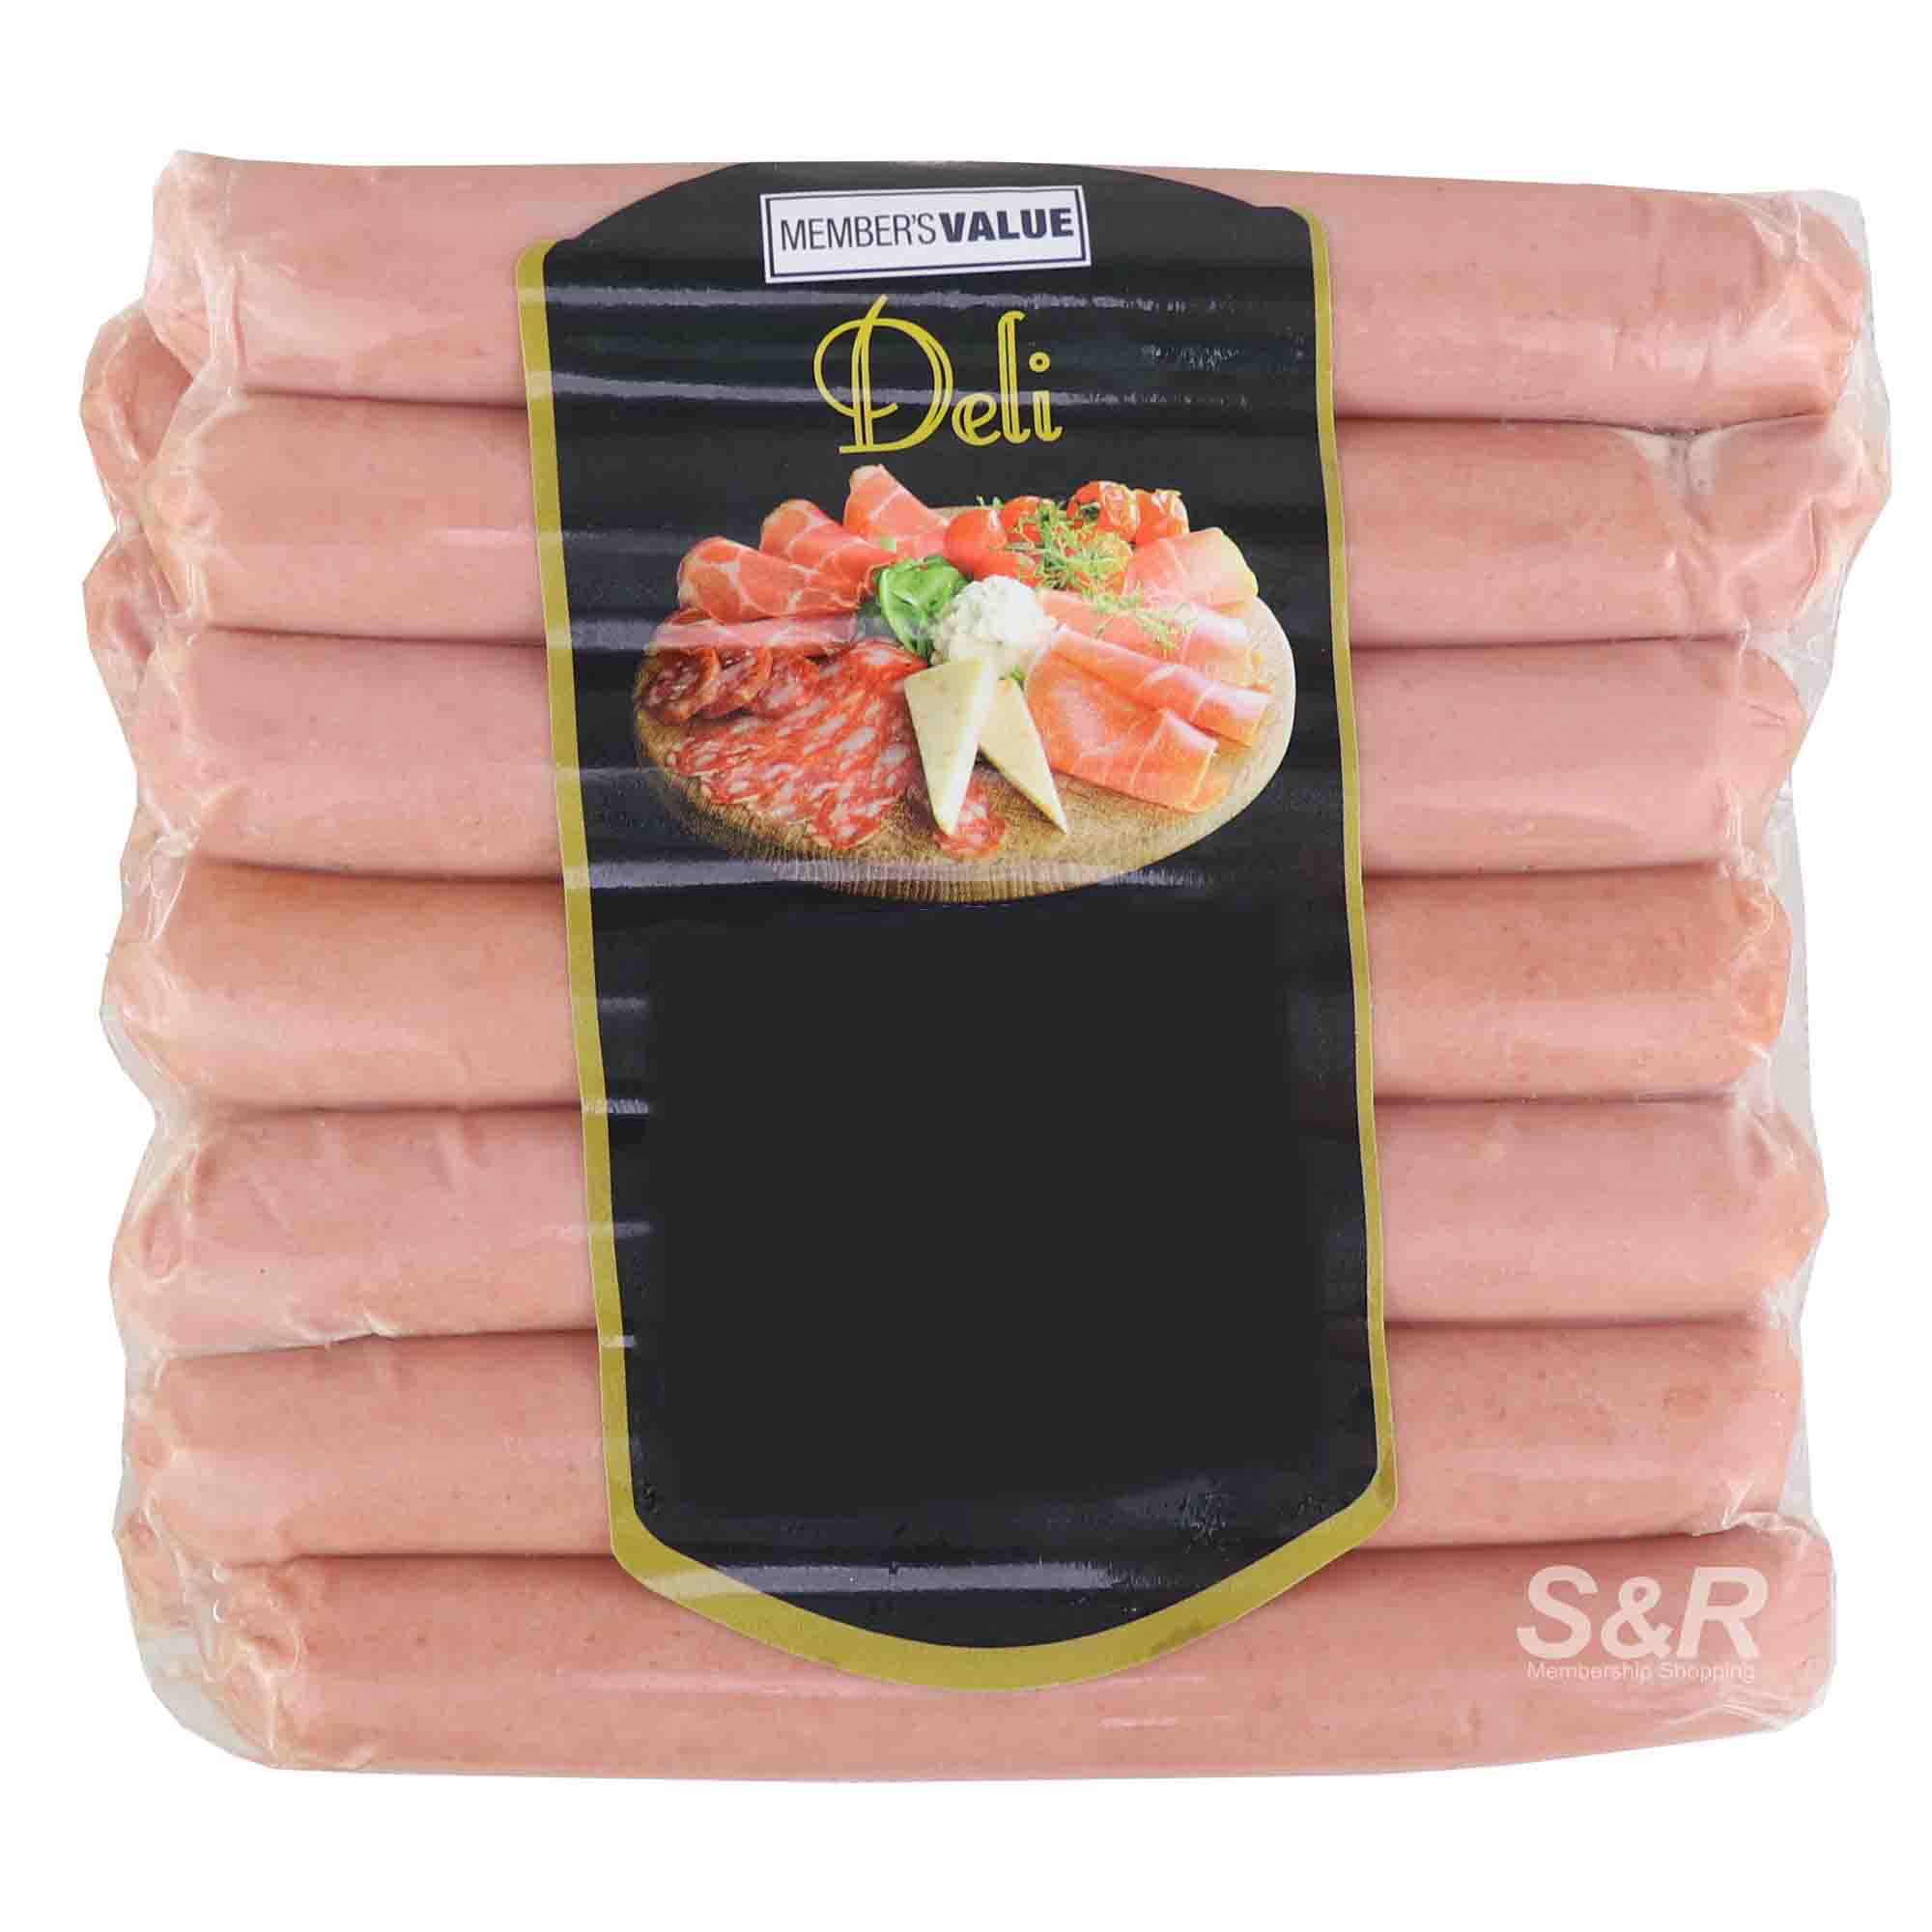 Member's Value Cheese Dog approx. 1kg